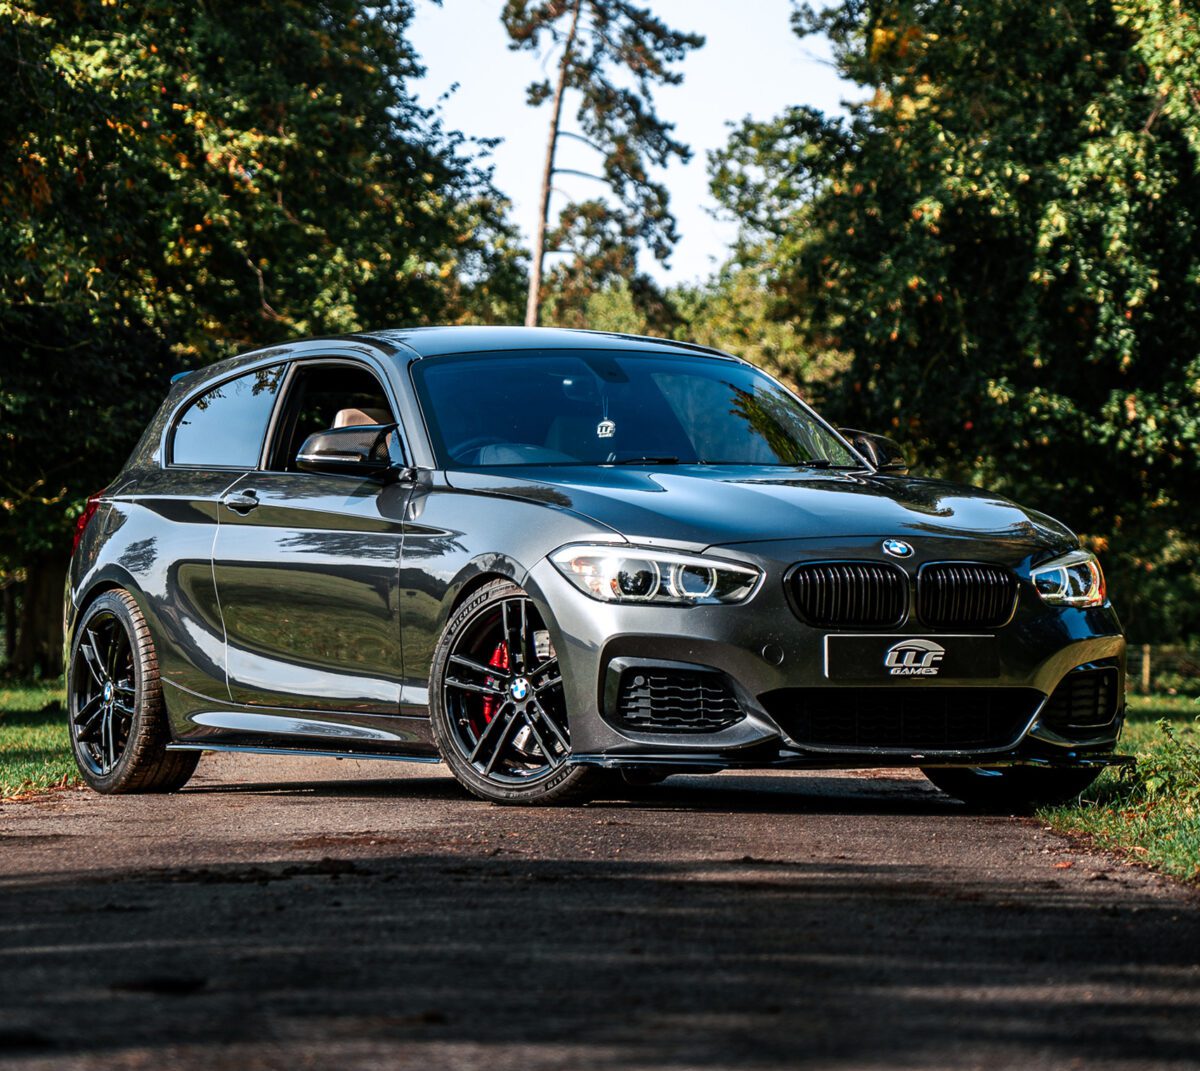 BMW SERIE 1 m140i-shadow-edition-5dr-step-auto-stage-2-gad-tuning-opf-removal-cobra-decat  occasion - Le Parking